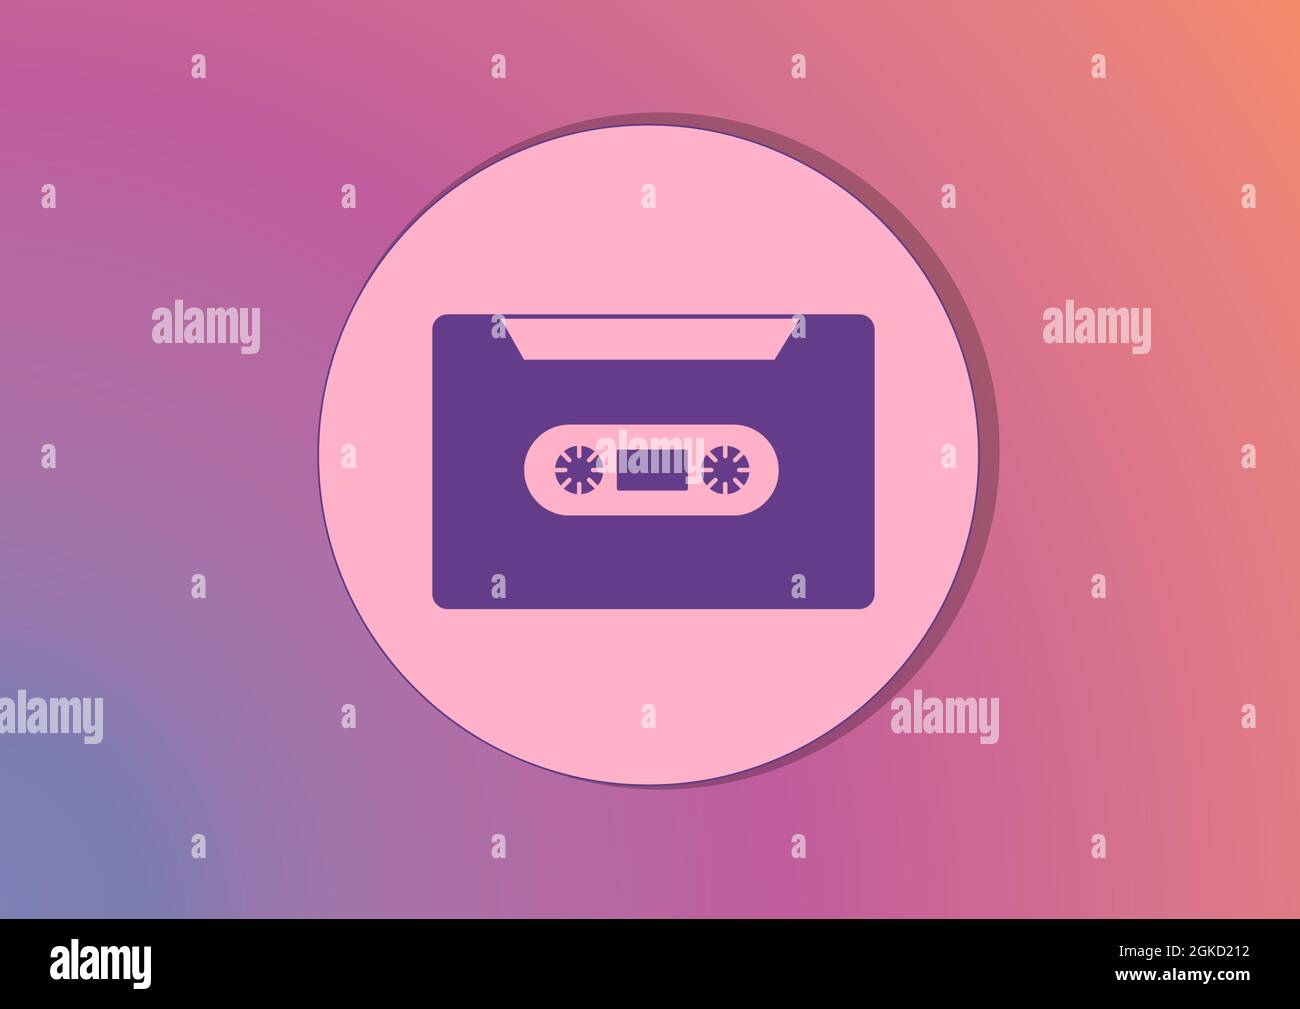 Digitally generated image of vhs cassette icon on round pink banner against gradient background Stock Photo